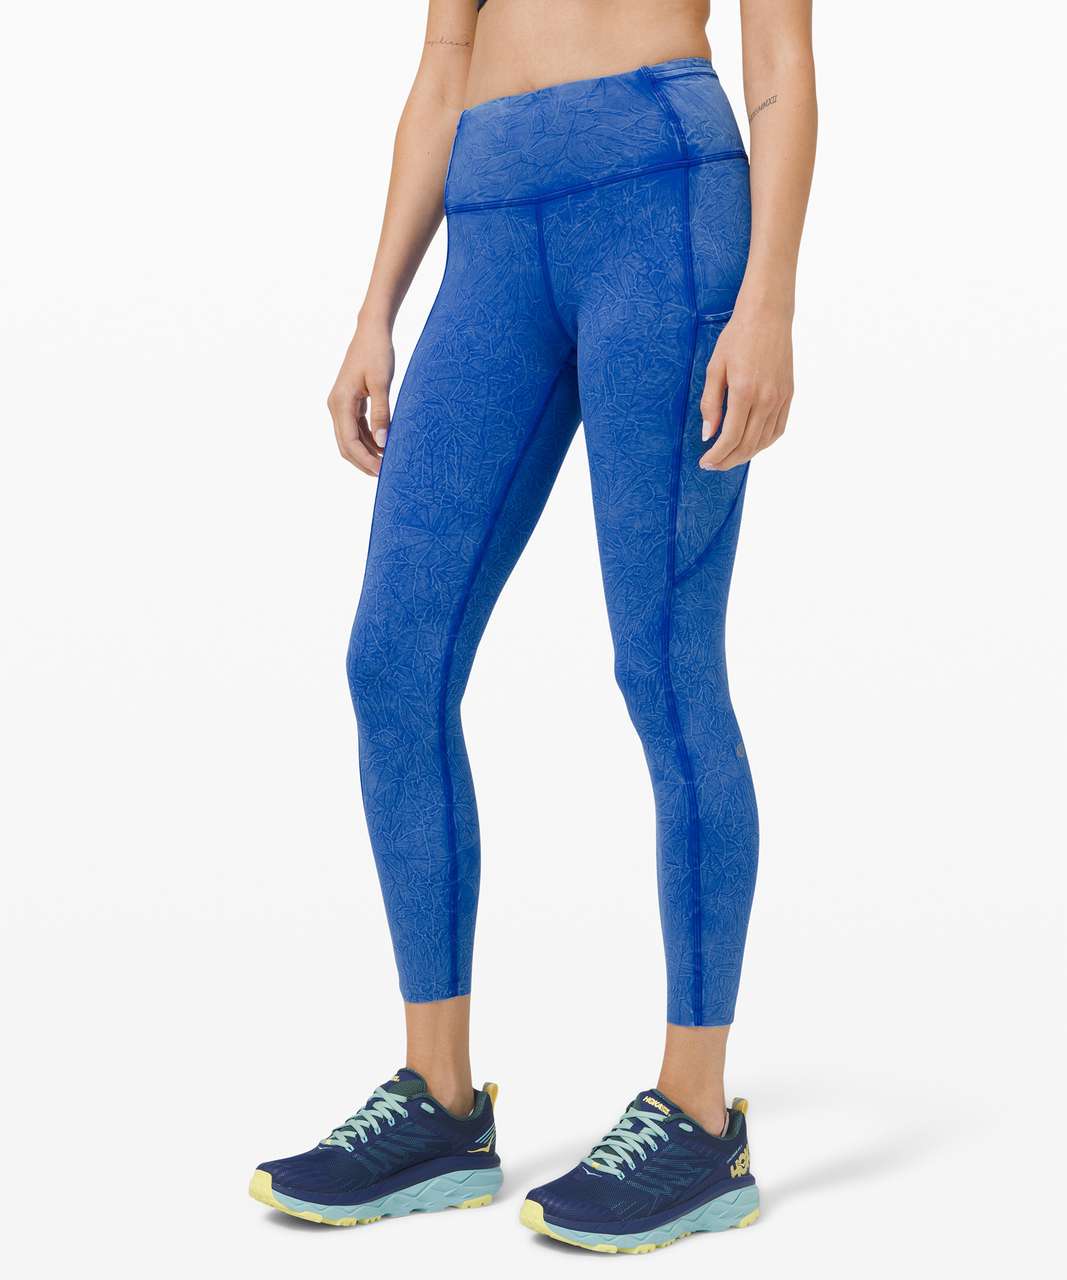 Lululemon Fast and Free High Rise Tight 25" *Ice Dye - Ice Wash Cerulean Blue